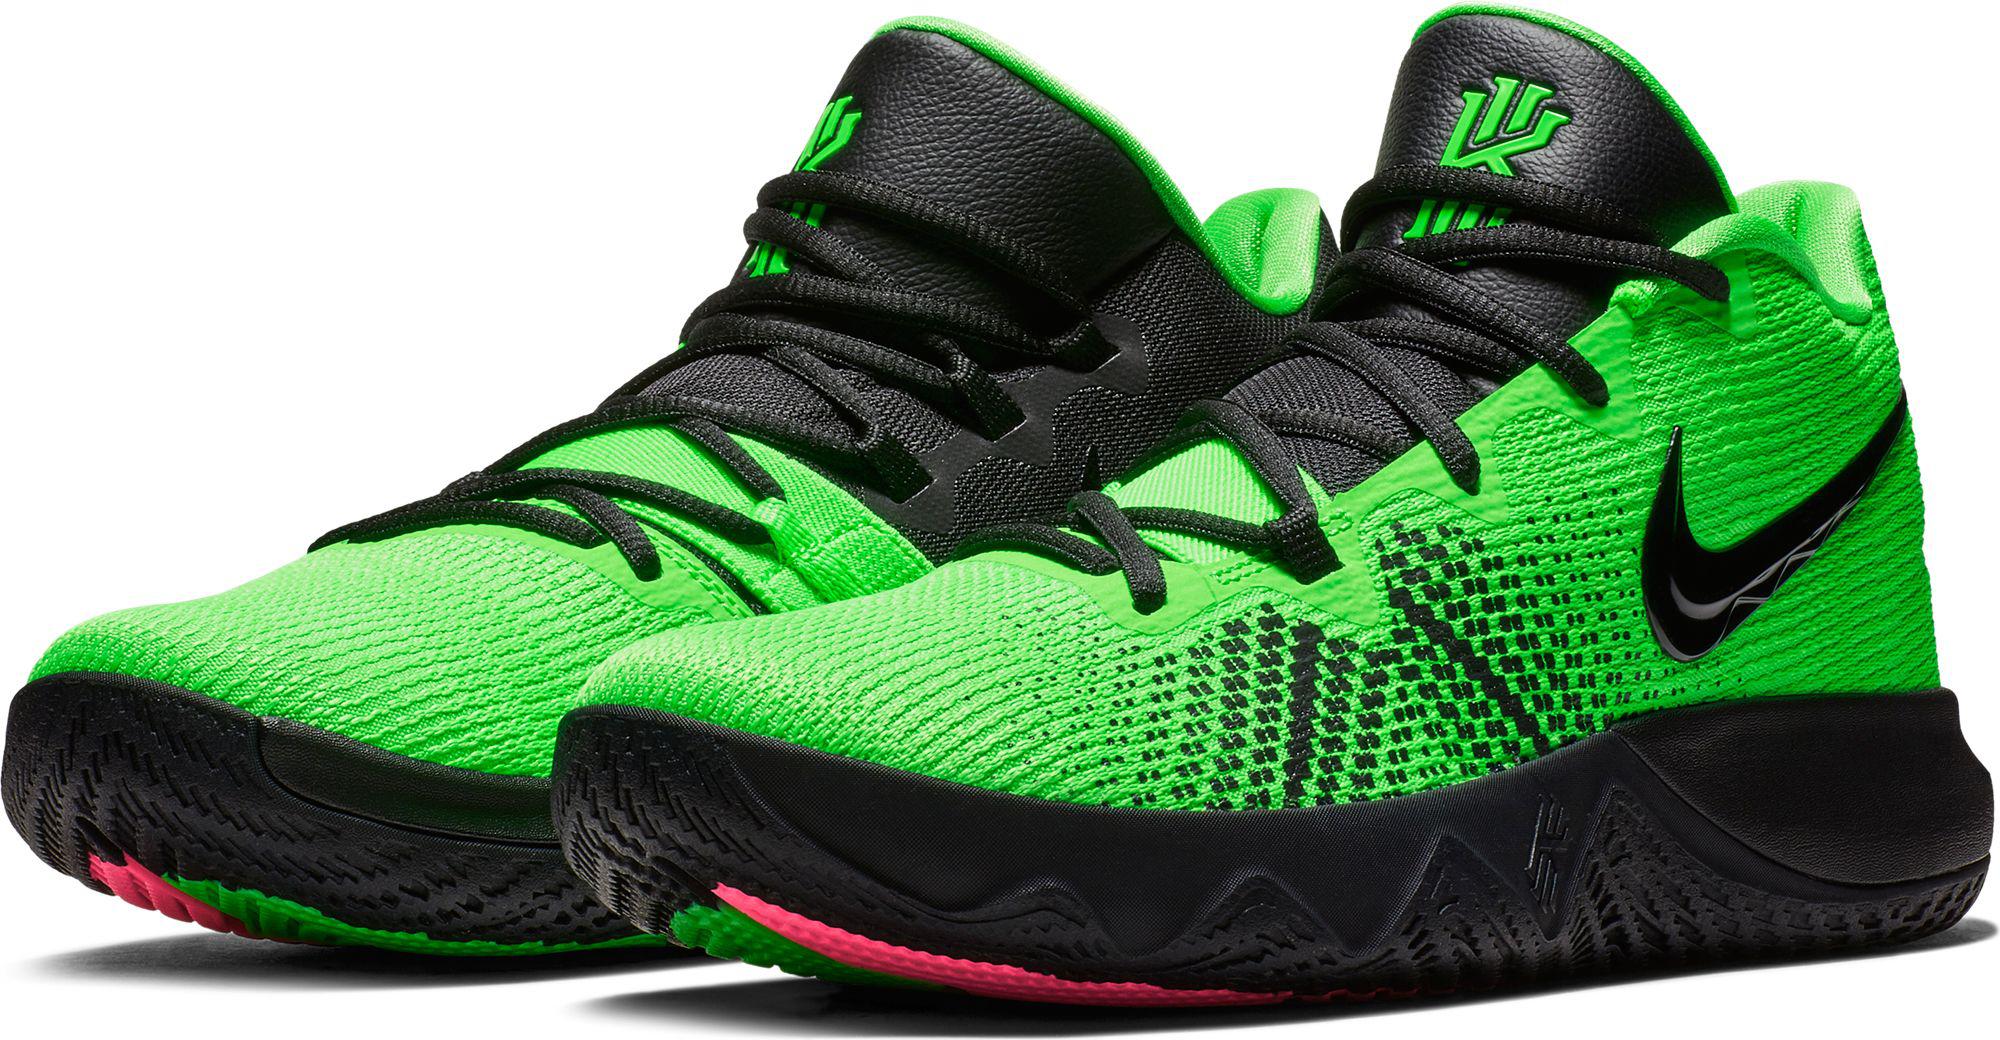 Nike Rubber Kyrie Flytrap Basketball Shoes in Green/Black